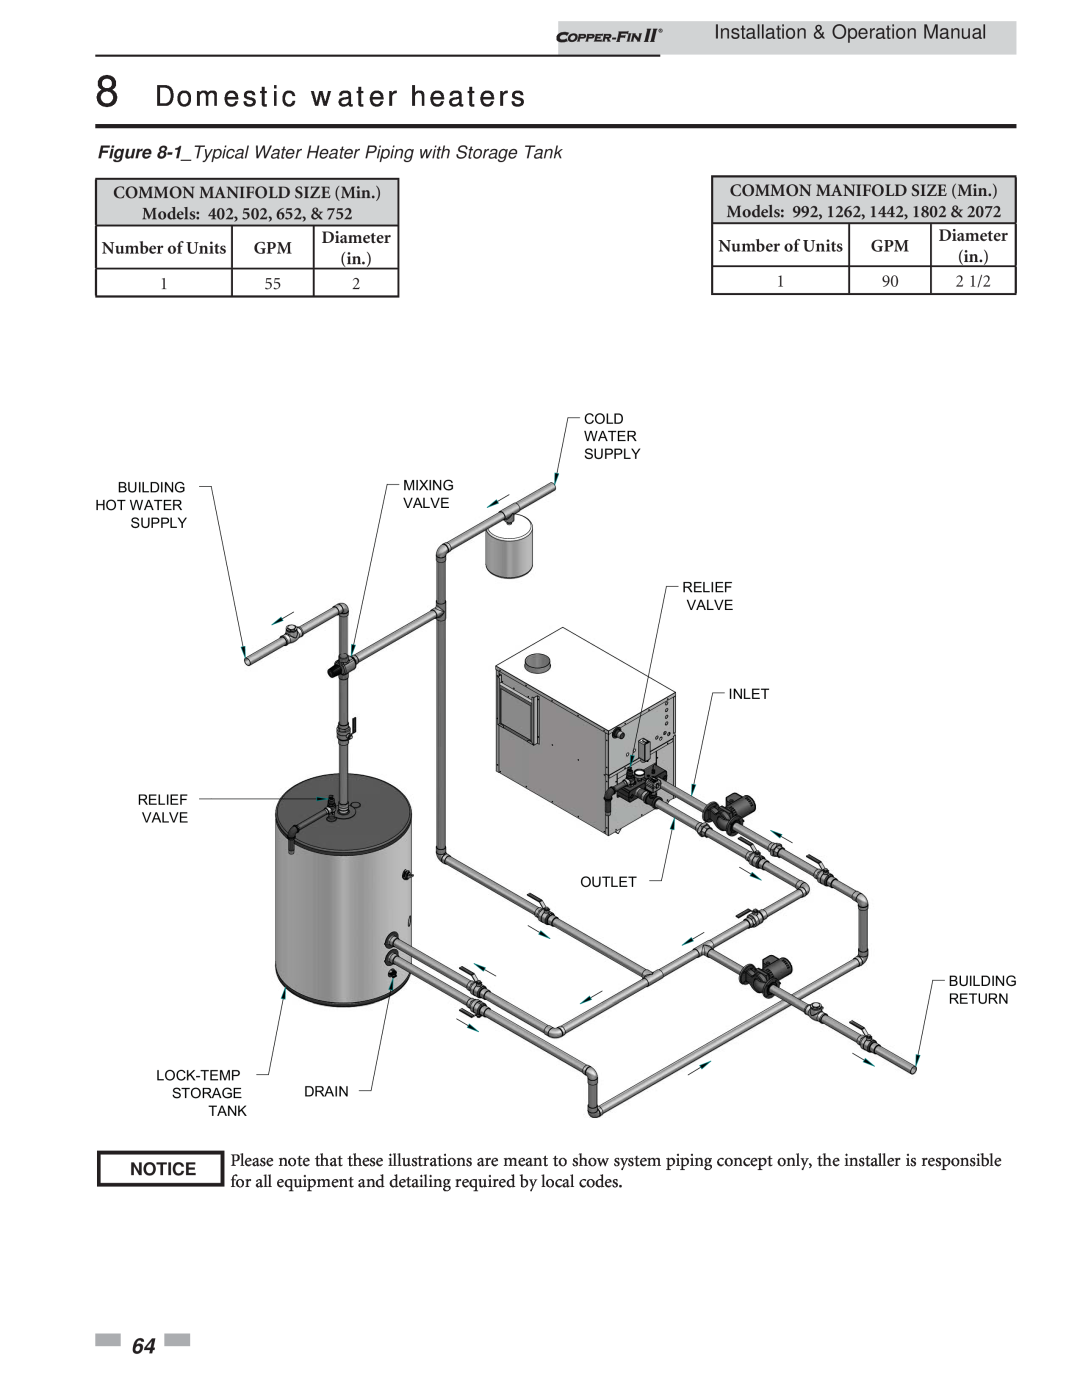 Lochinvar 402 - 2072 operation manual Domestic water heaters, Installation & Operation Manual, Notice, Storage Tank 